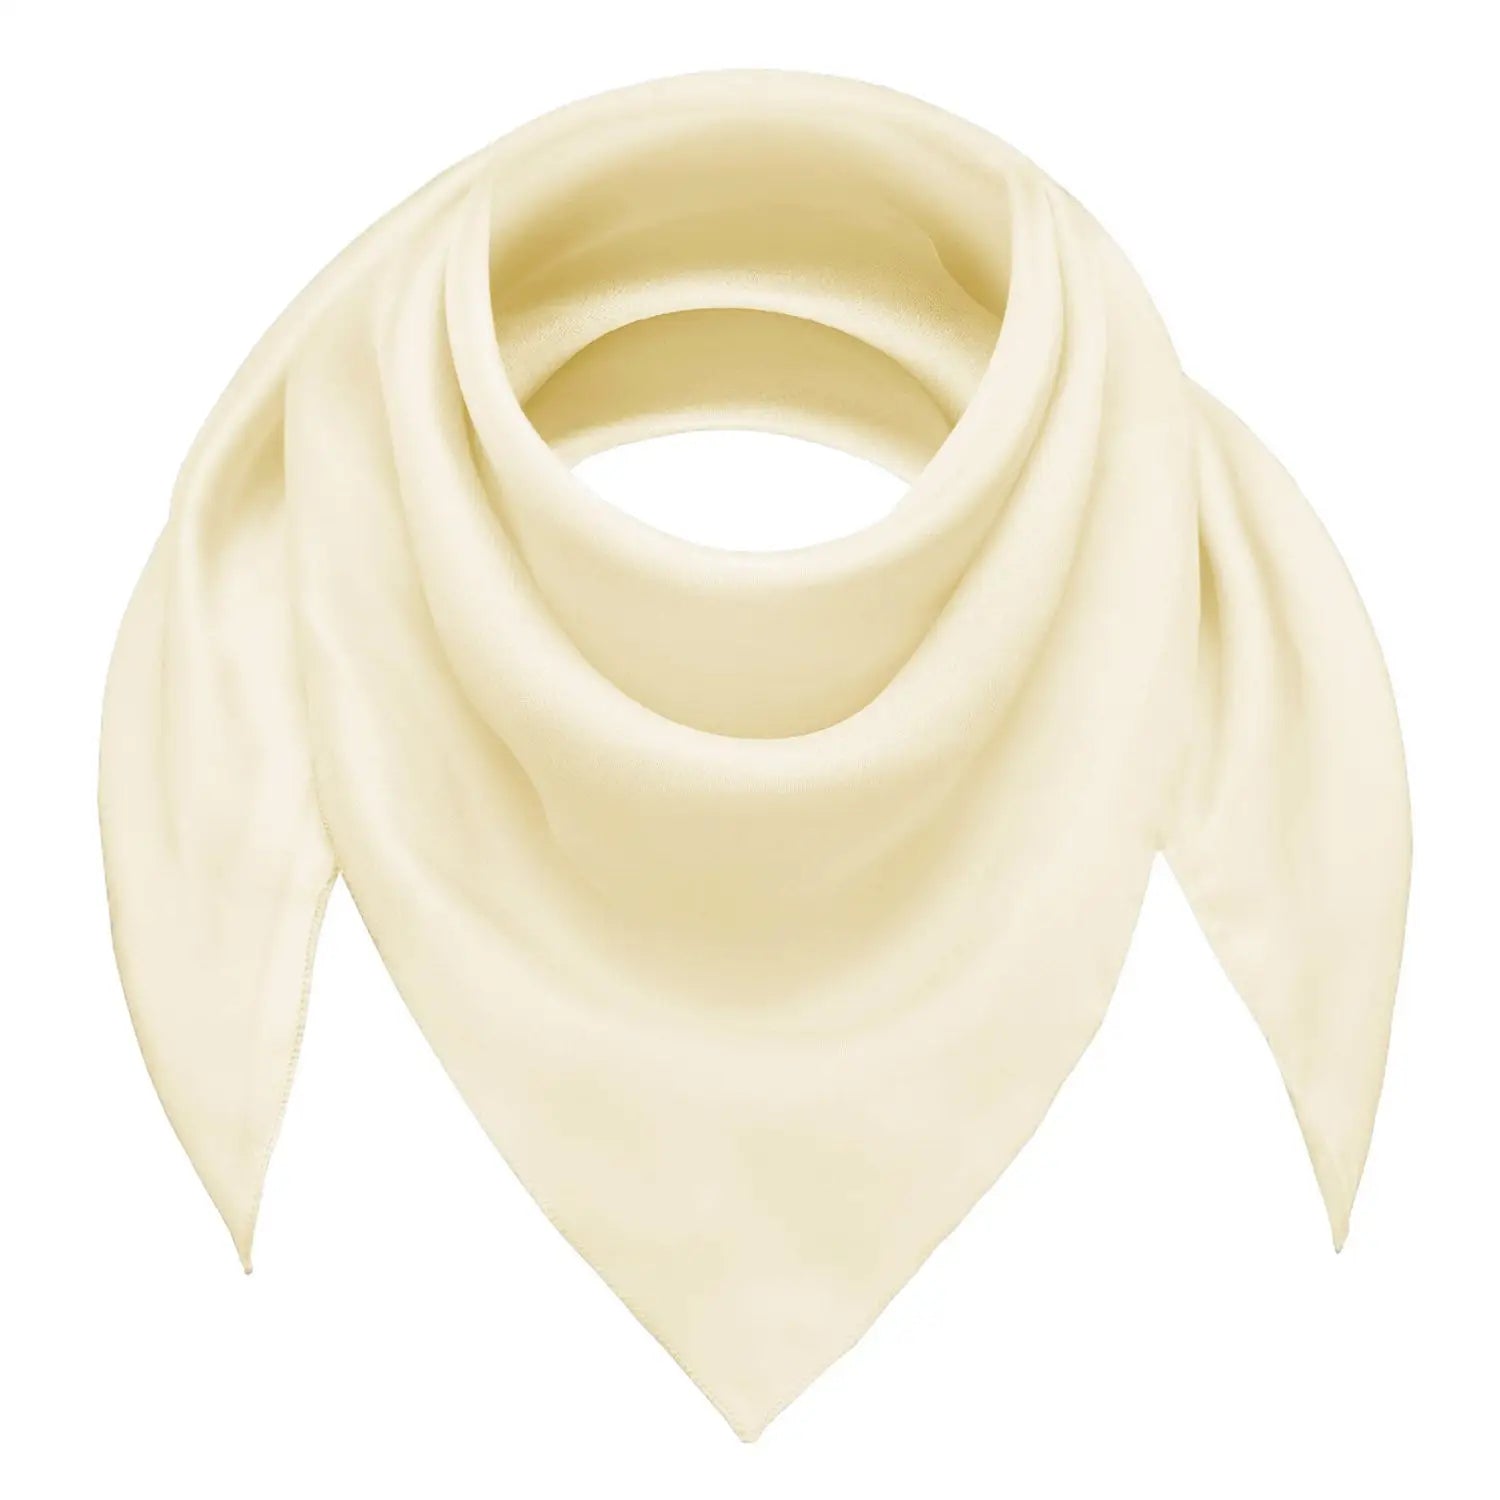 Chiffon square scarf on white background - Lightweight accessory for women.